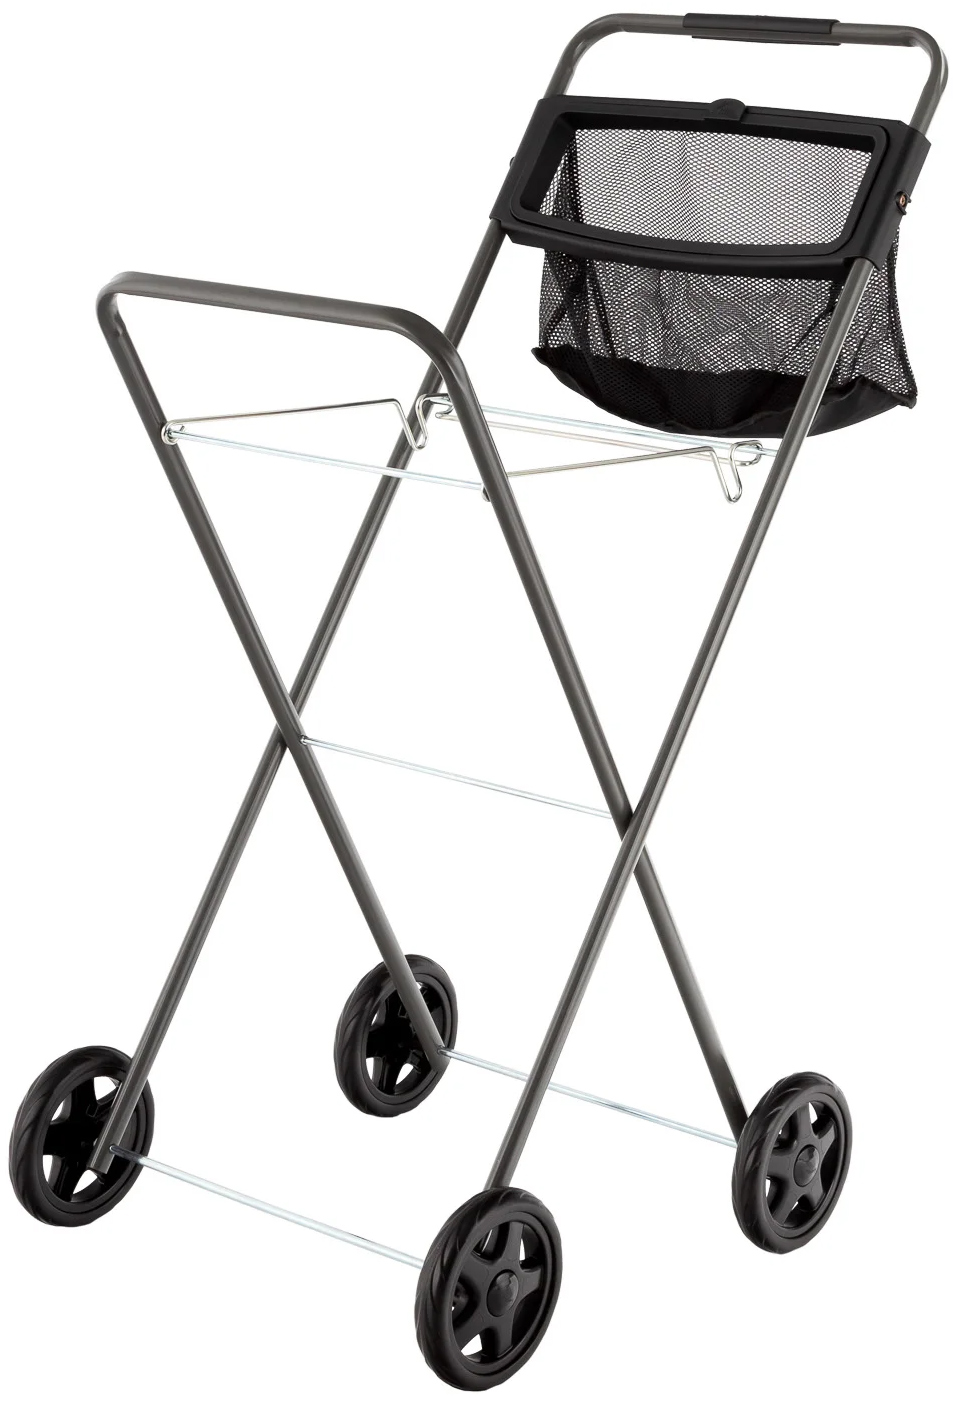 Hills Panache Extra Tall Premium Laundry Trolley with Peg Bag #1